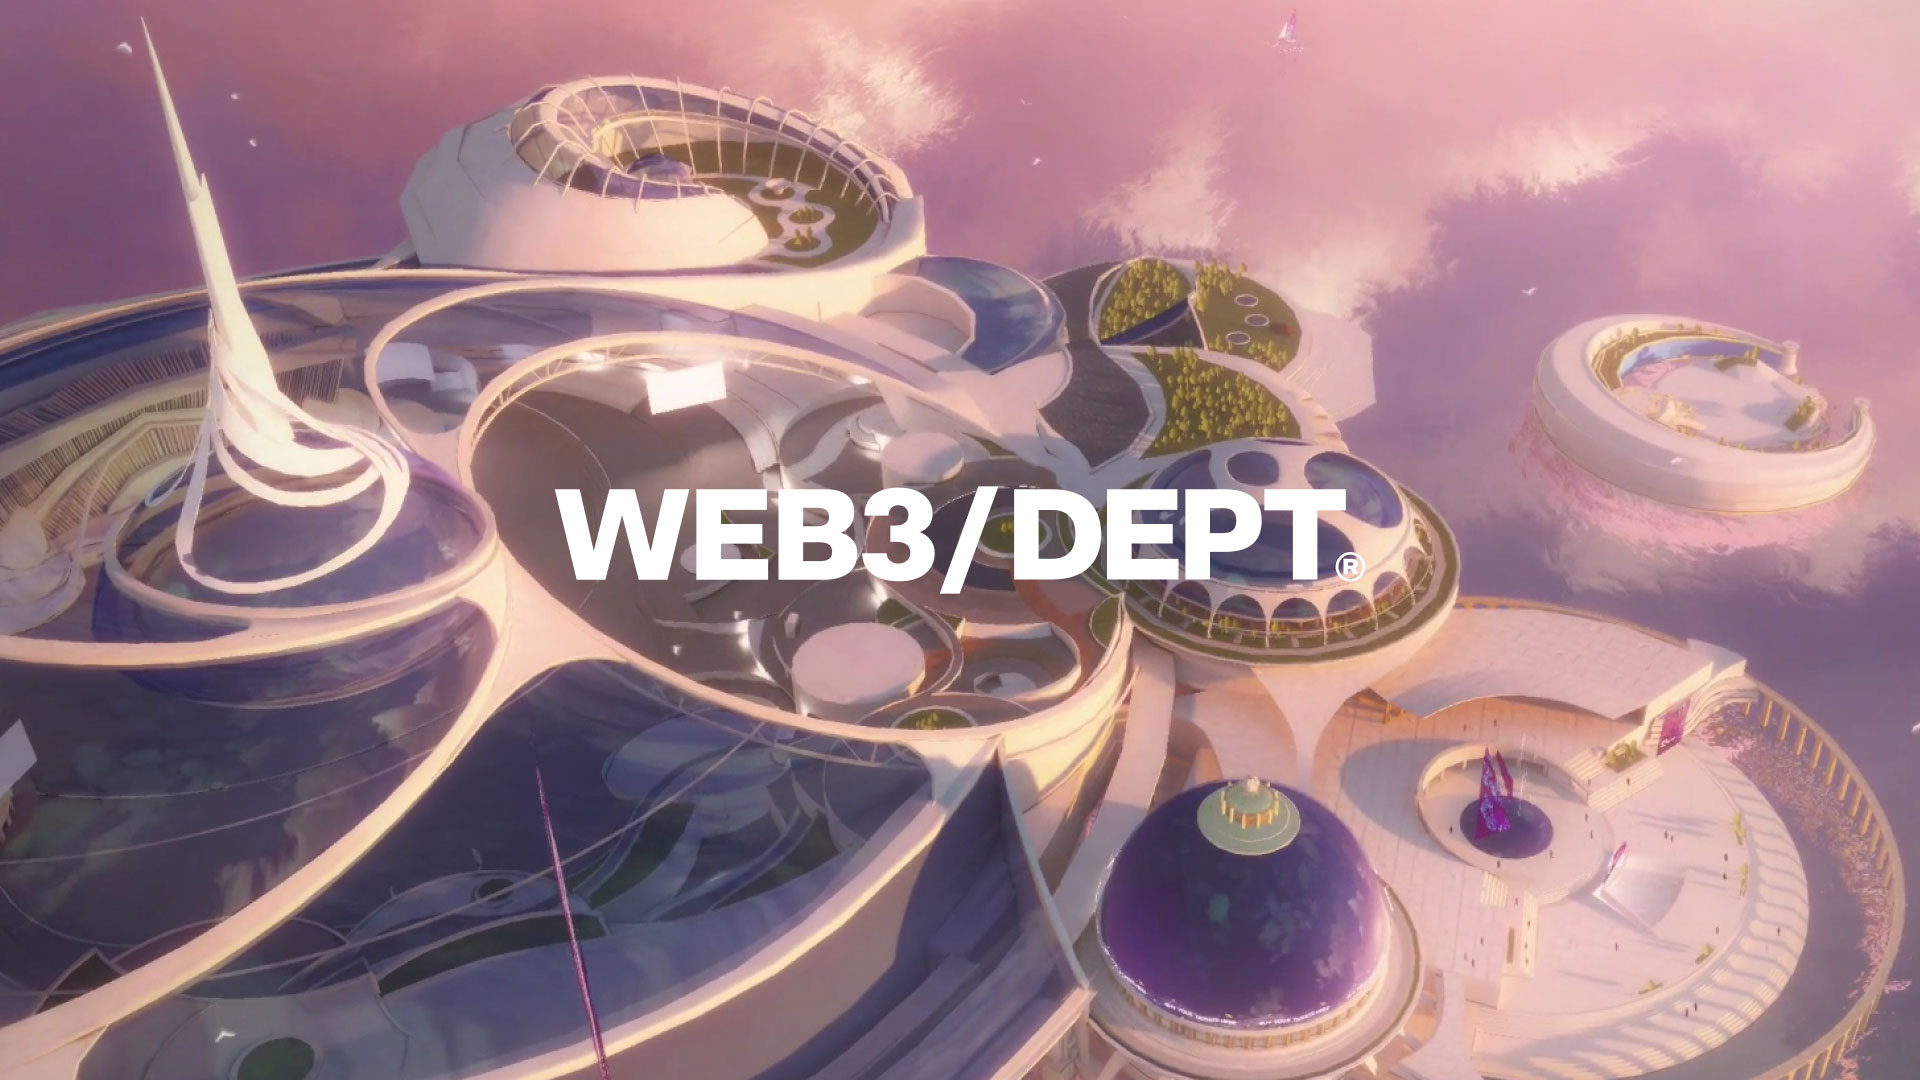 WEB3/DEPT® is building the next generation of the web